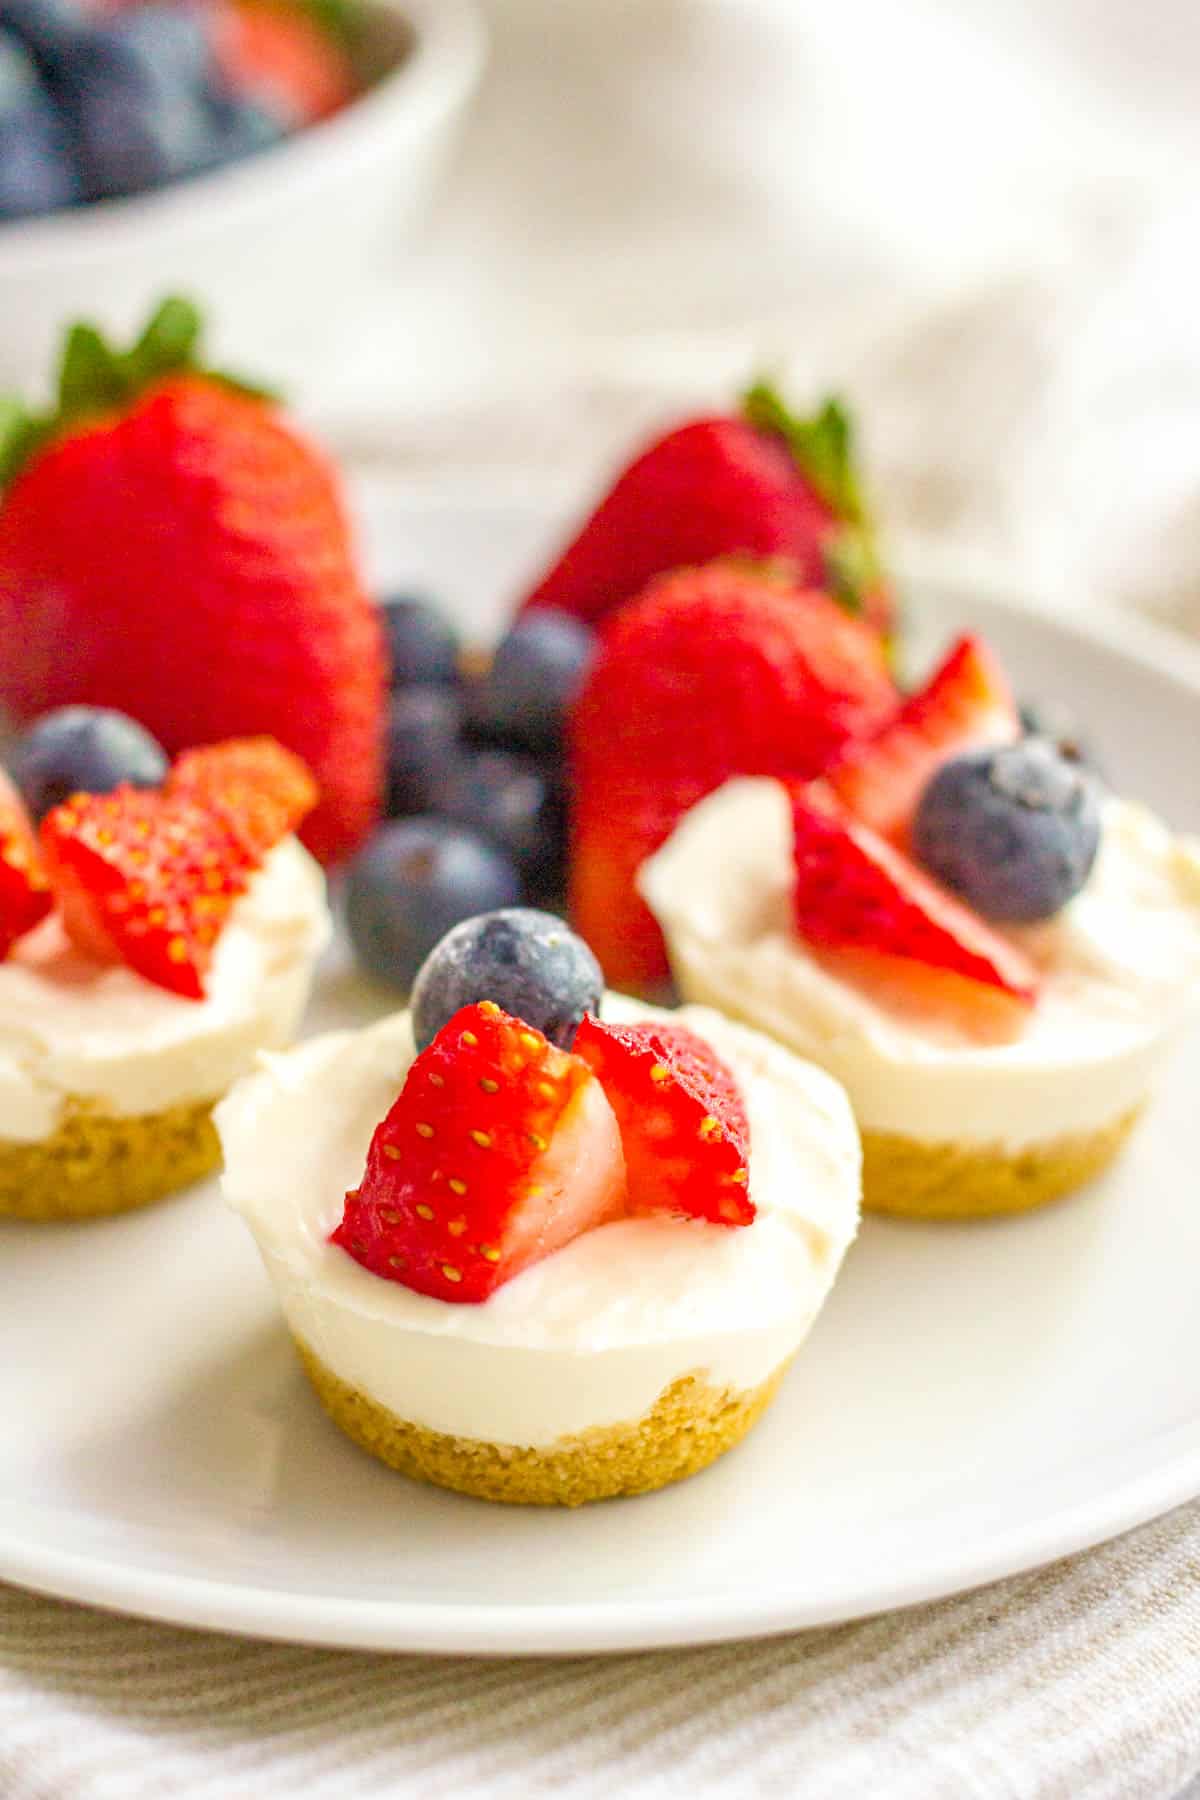 Mini cheesecake bites with a graham cracker crust and fresh fruit on top served on a small white plate.